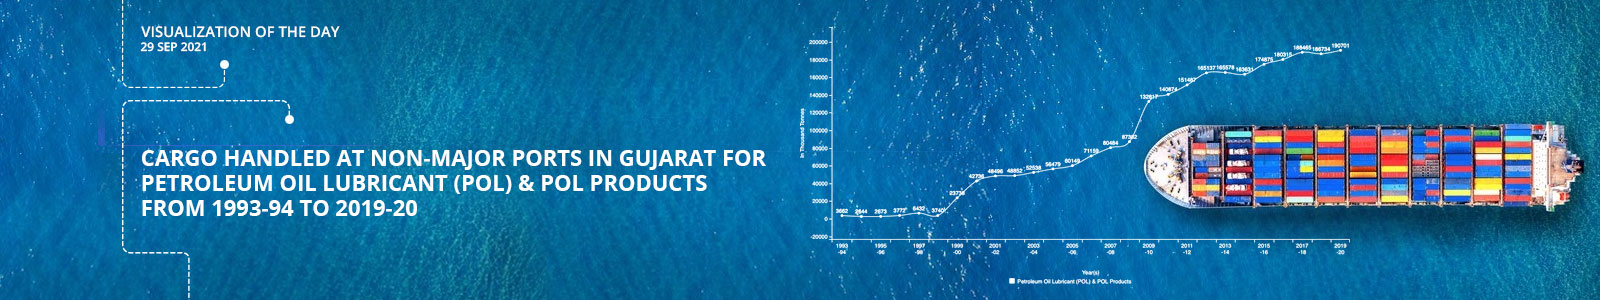 Cargo Handled at Non-Major Ports in Gujarat for Petroleum Oil Lubricant (POL) & POL Products from 1993-94 to 2019-20